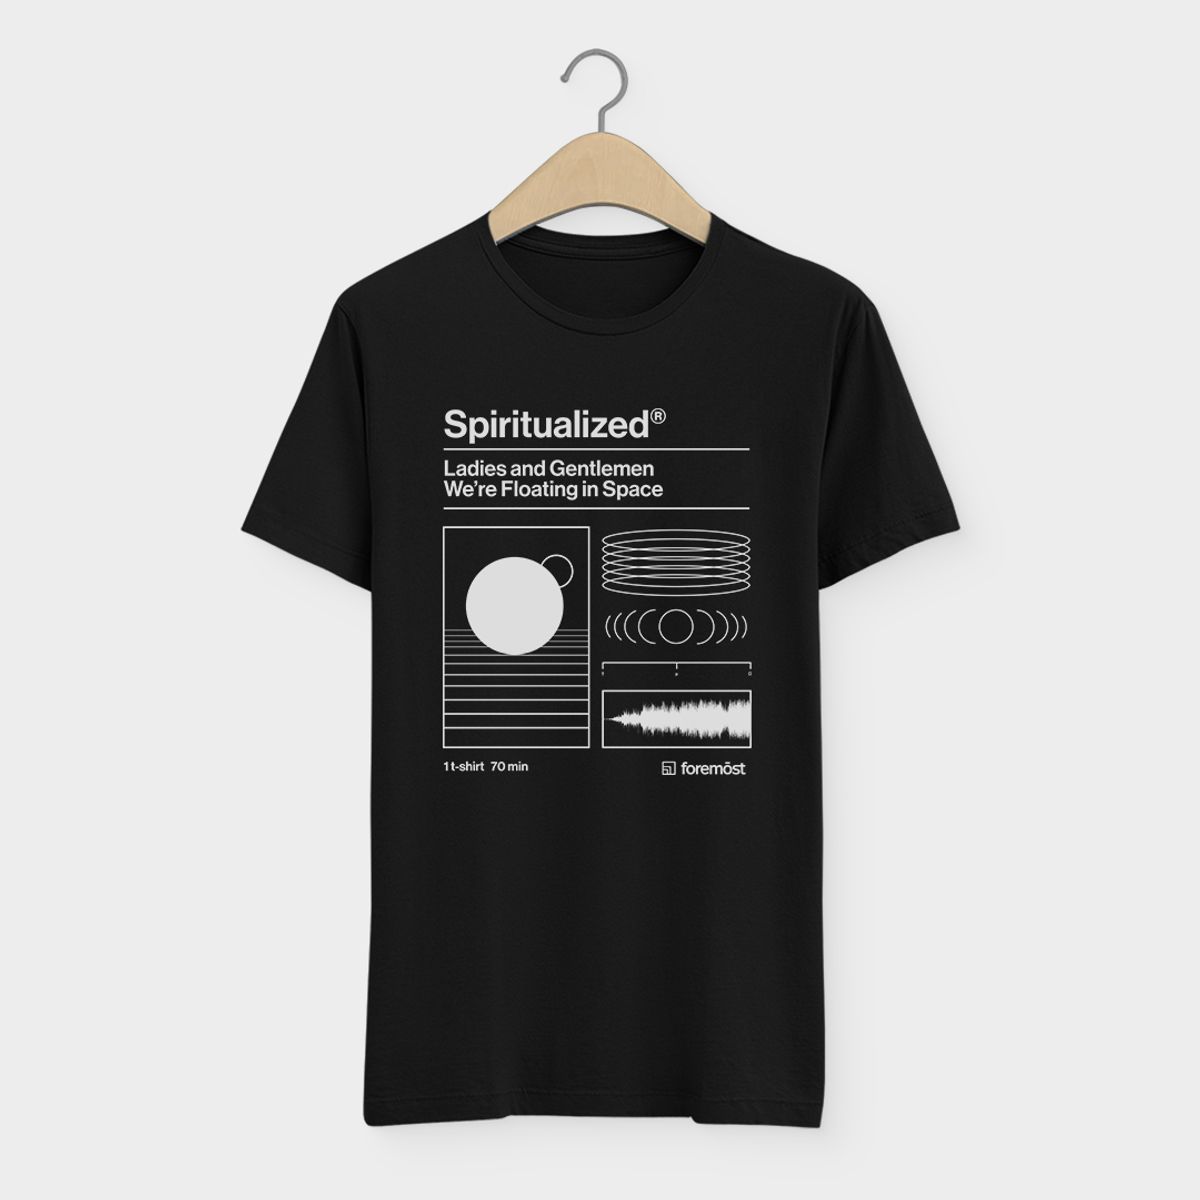 Nome do produto: Camiseta Spiritualized  Ladies and Gentlemen We Are Floating in Space 